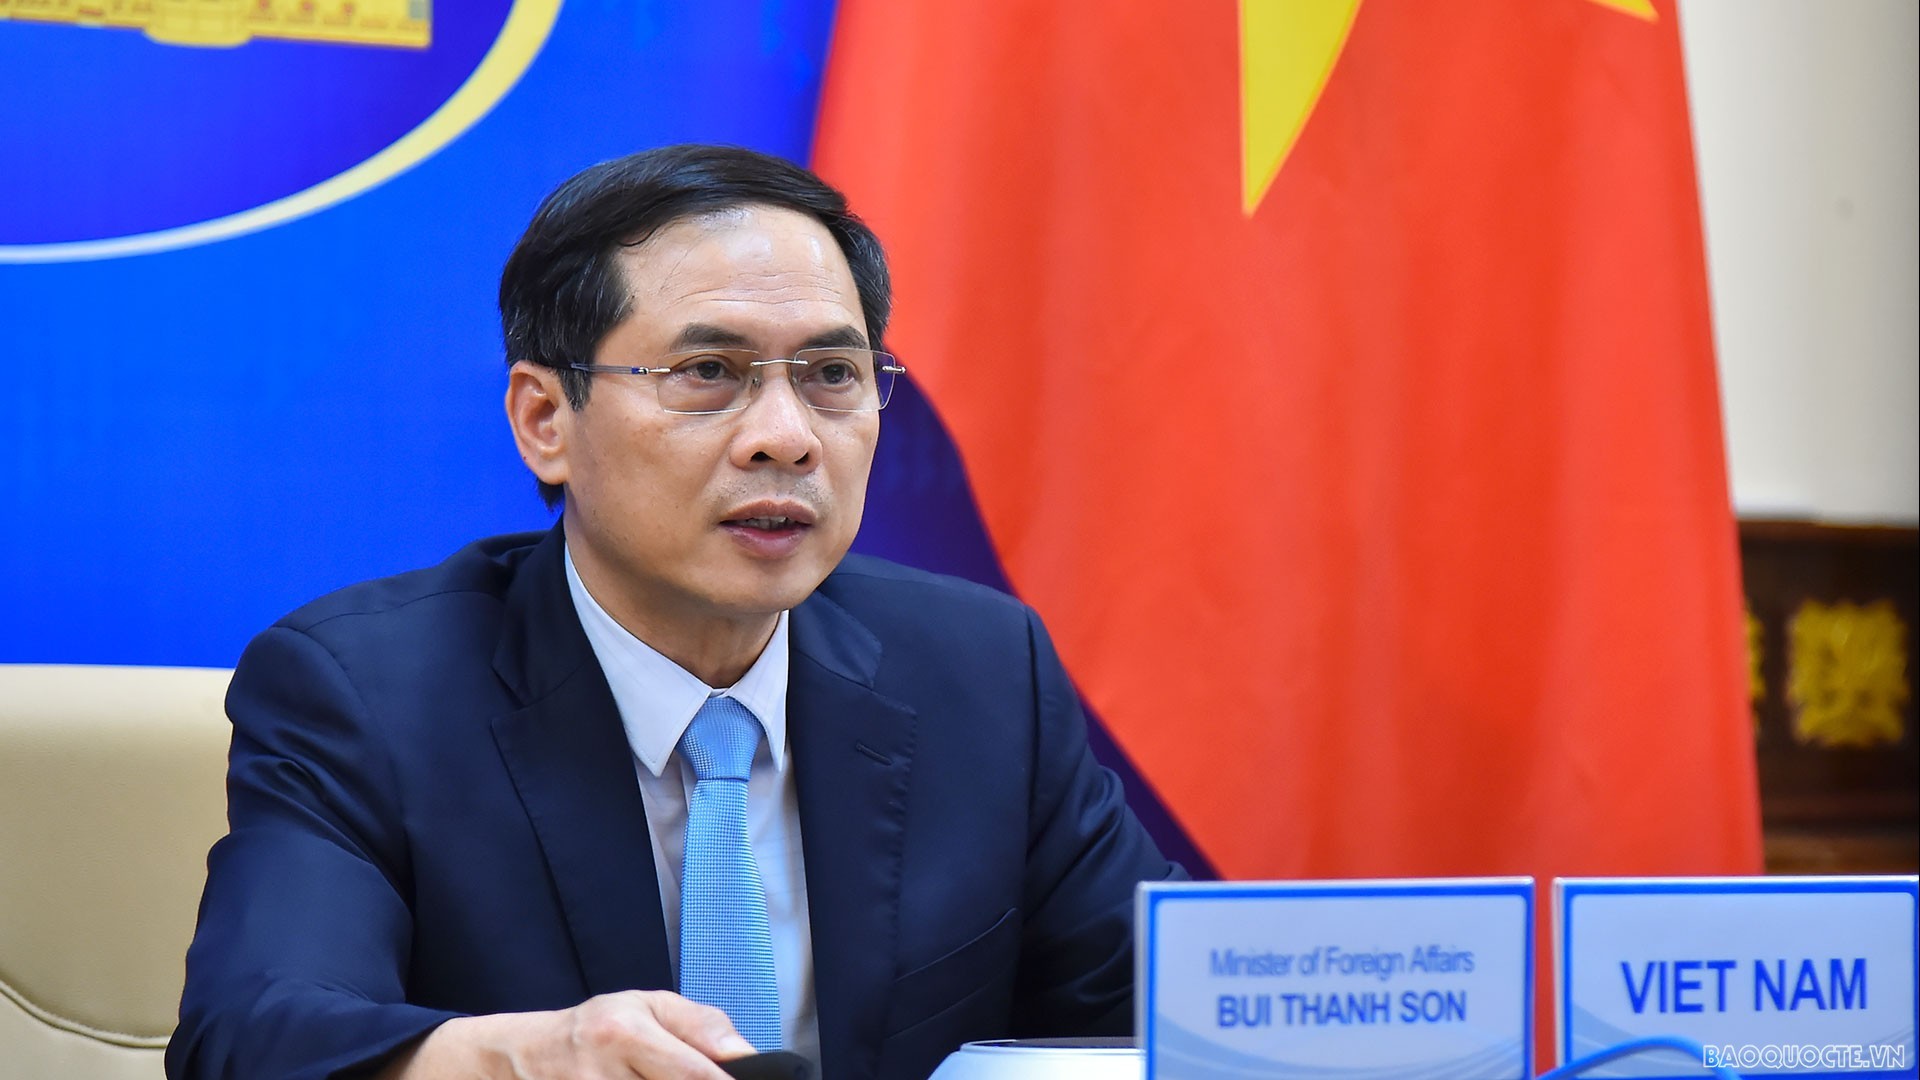 Foreign Minister Bui Thanh Son attends Non-Aligned Movement ministerial meeting